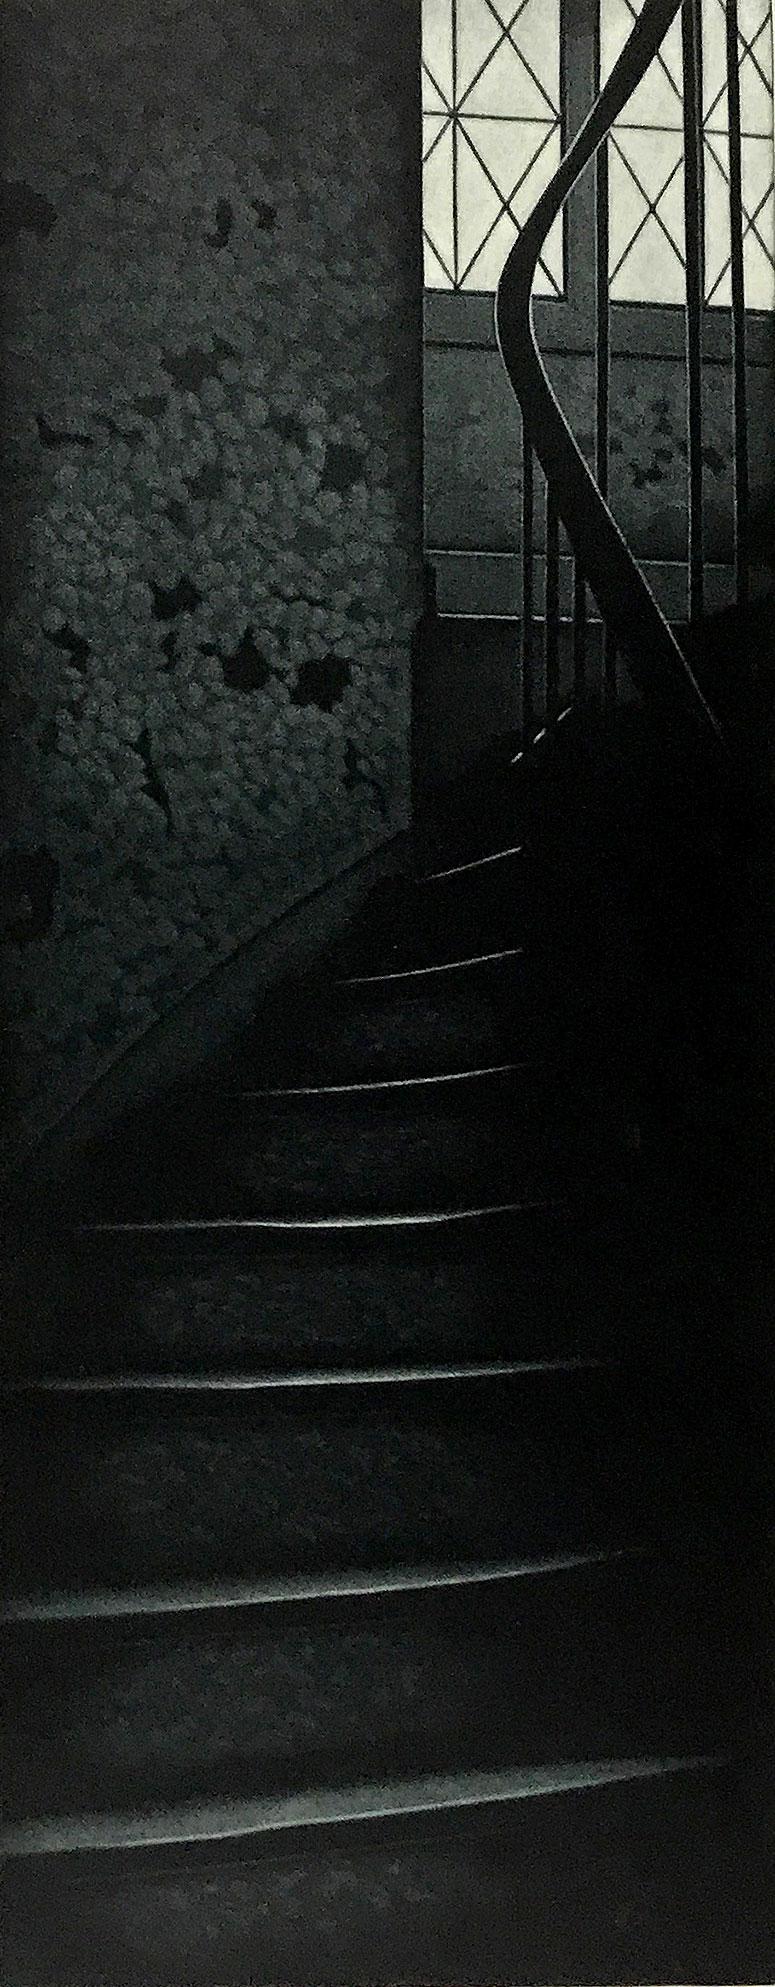 Before It Happened (A mysterious staircase offers no clues as to what happened)